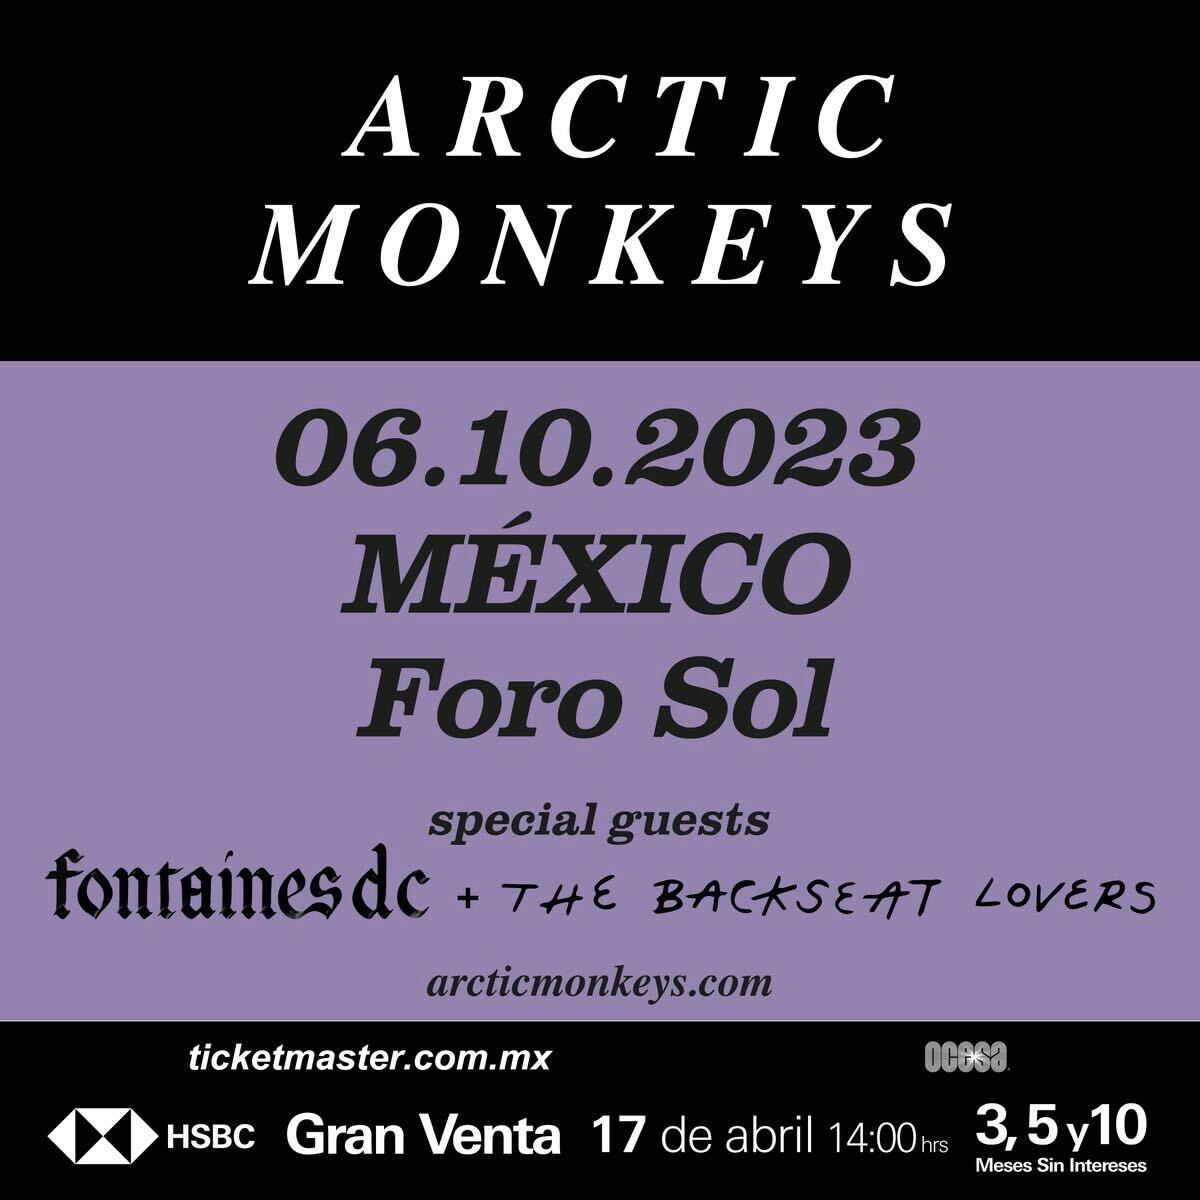 Arctic Monkeys will give a concert at Foro Sol in CDMX 